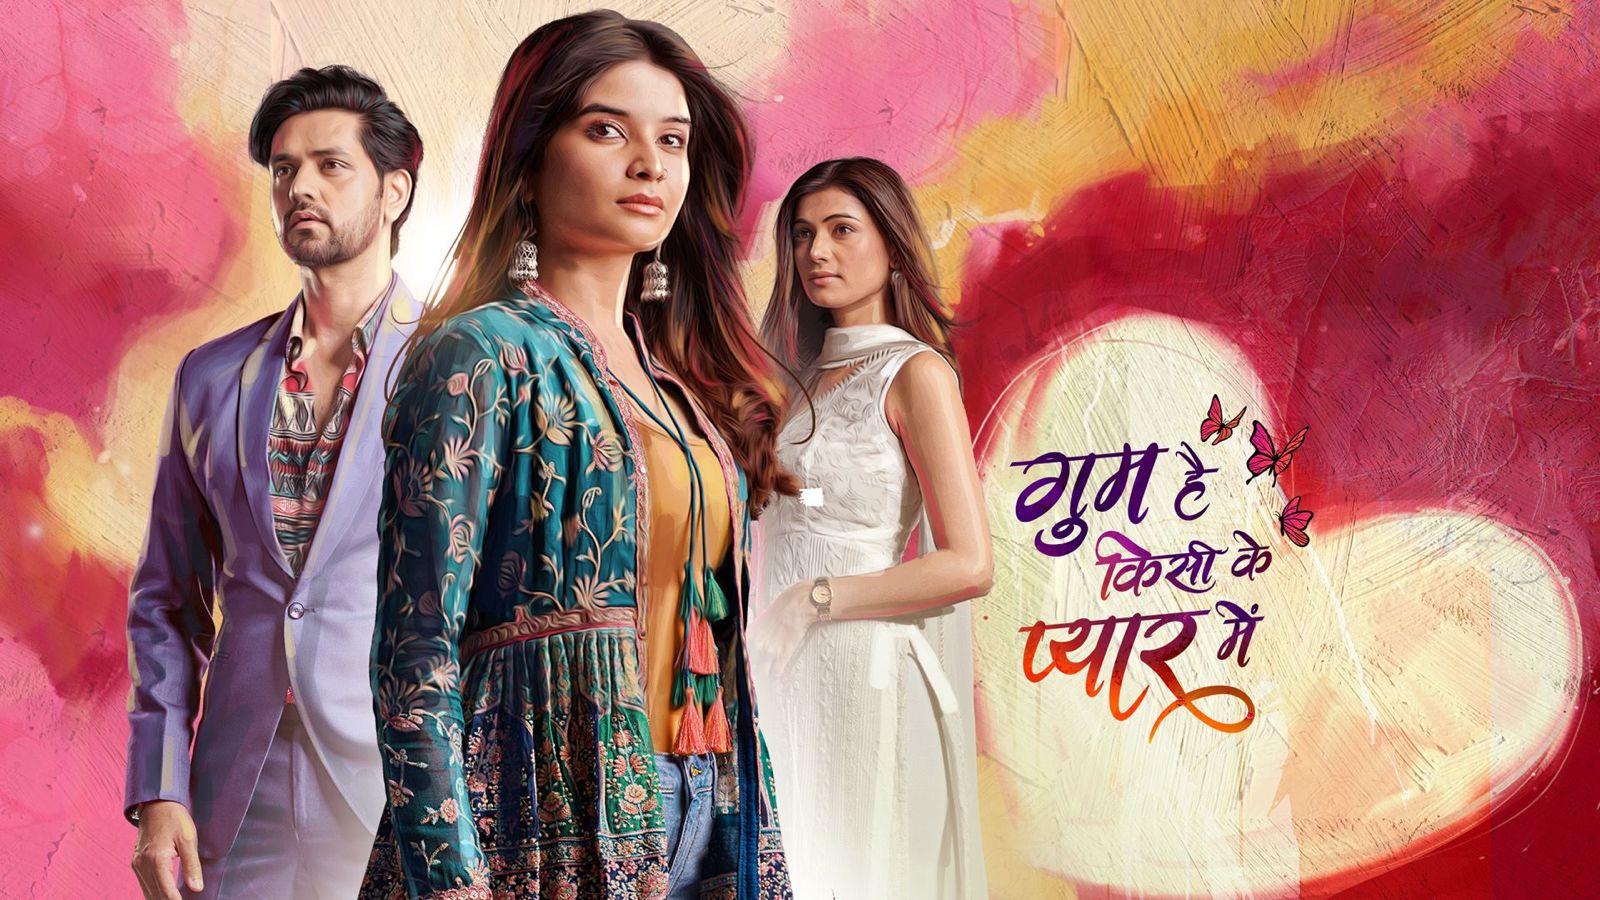 Shakti Arora and Bhavika Sharma Share Excitement About The New Adhyaay Of StarPlus Show Ghum Hain Kisikey Pyaar Meiin, Watch The New Adhyaay From Today At 8 p.m. On StarPlus!